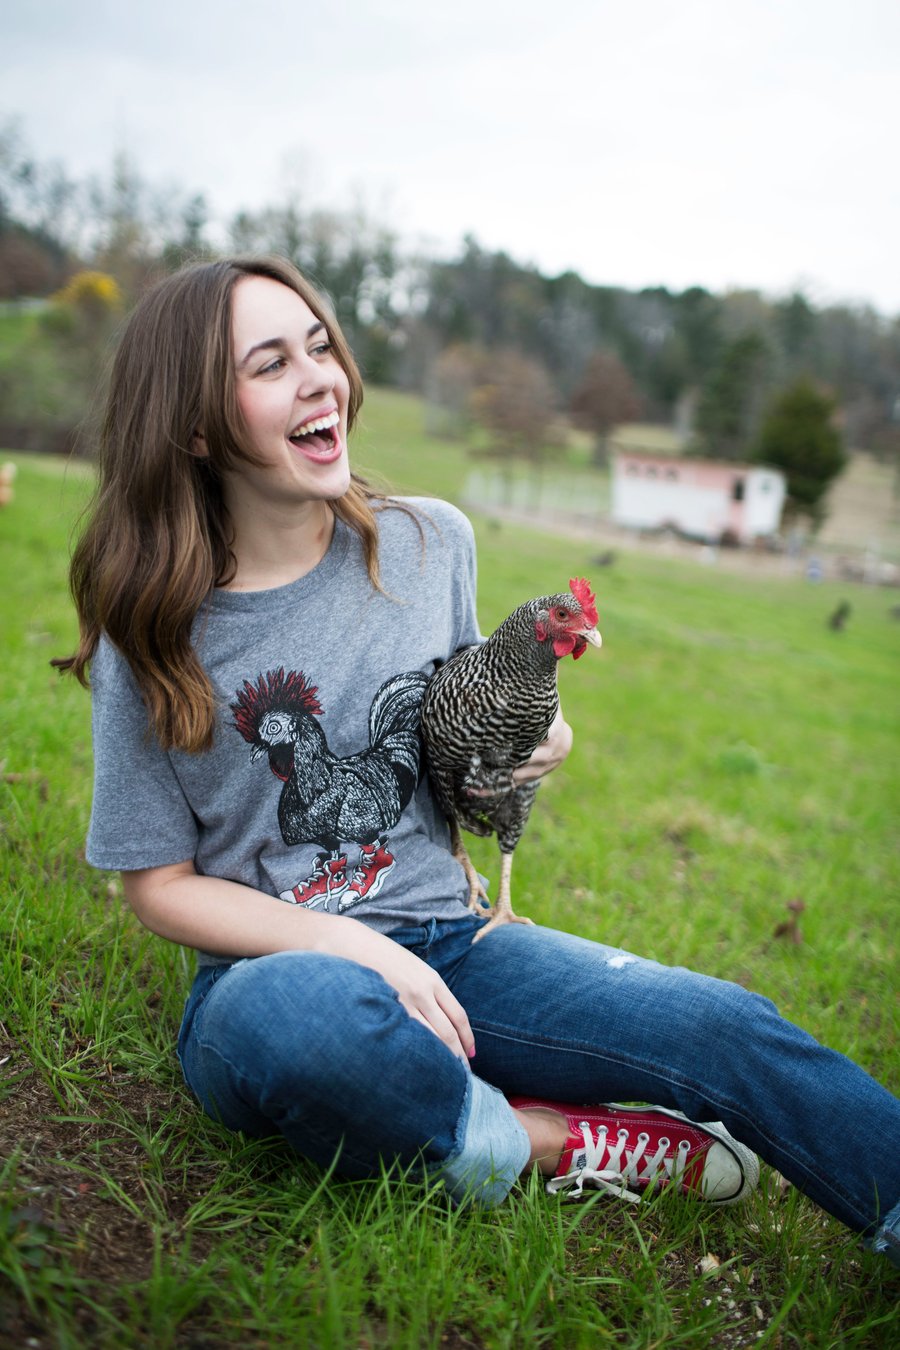 Image of Adult Cluck Taylor Short Sleeve CREW Tee